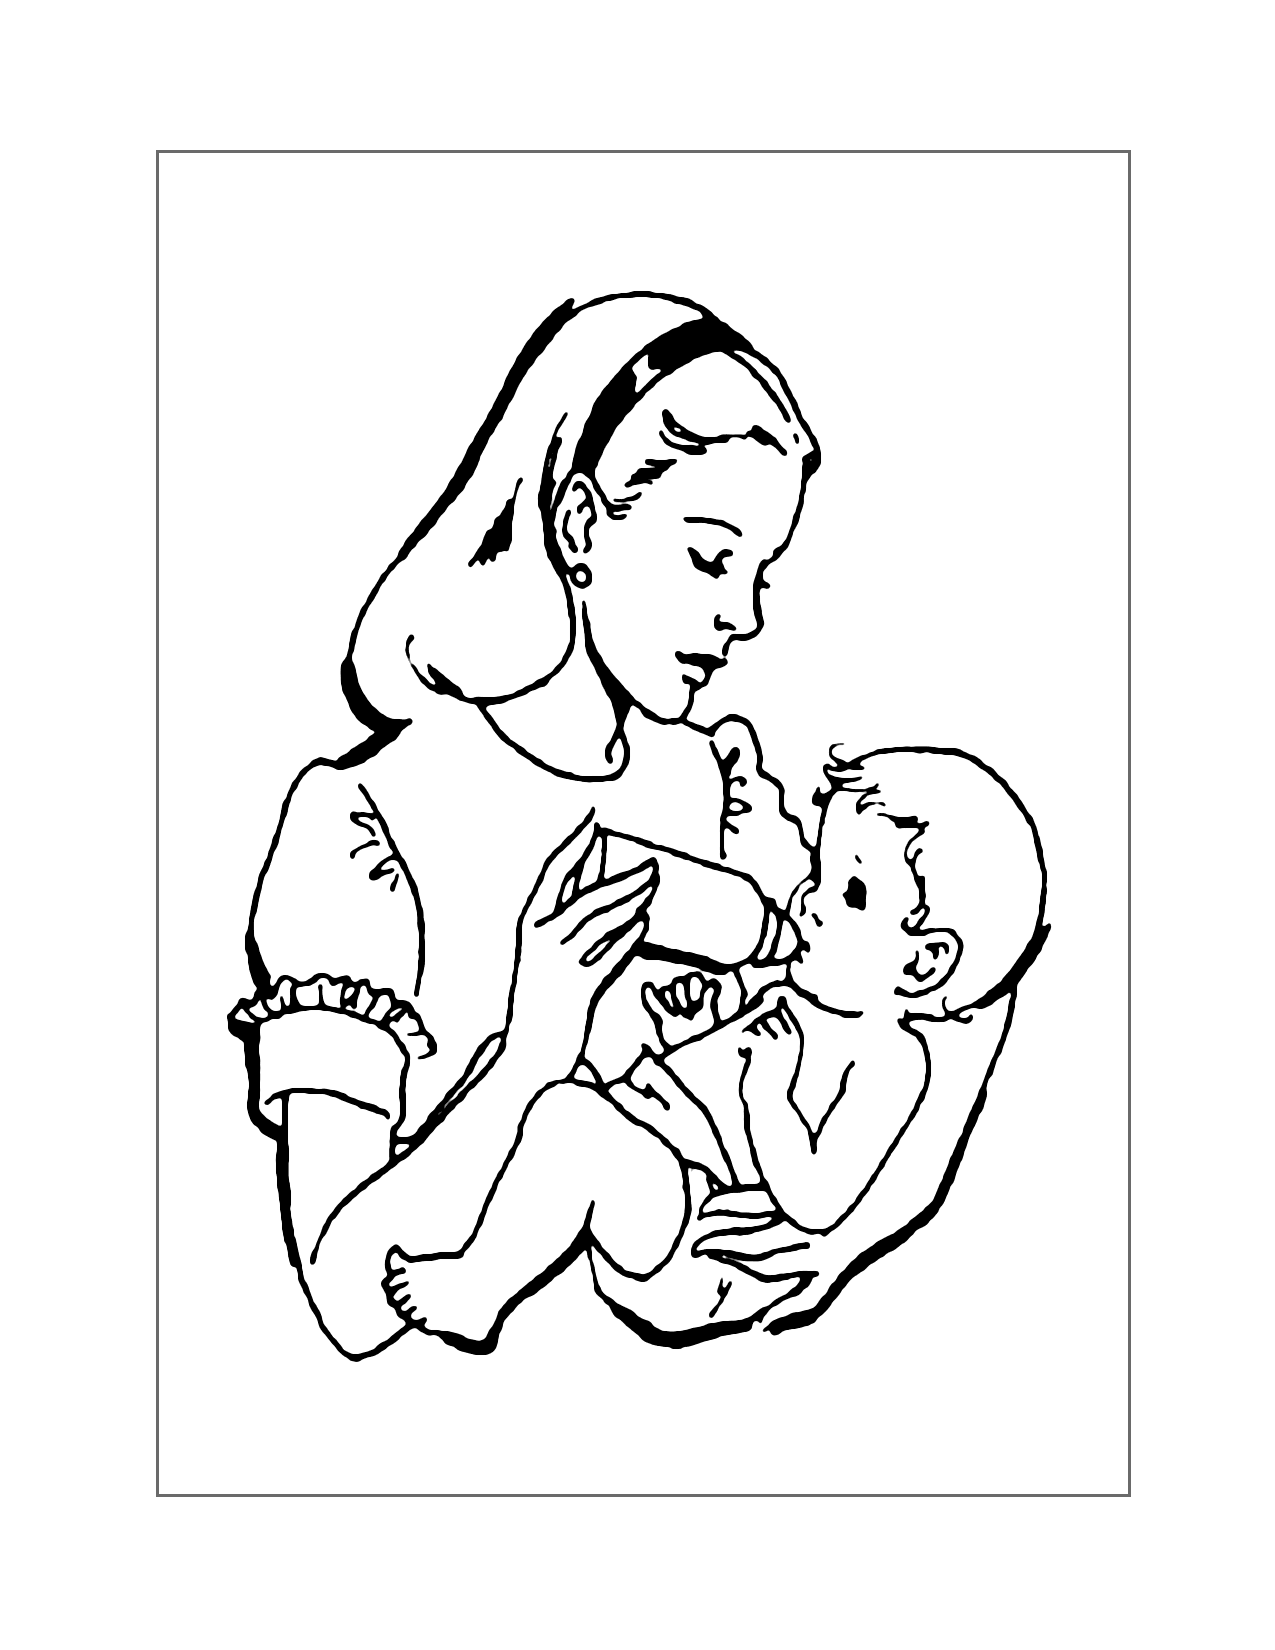 Woman Feeding Bottle To A Baby Coloring Page